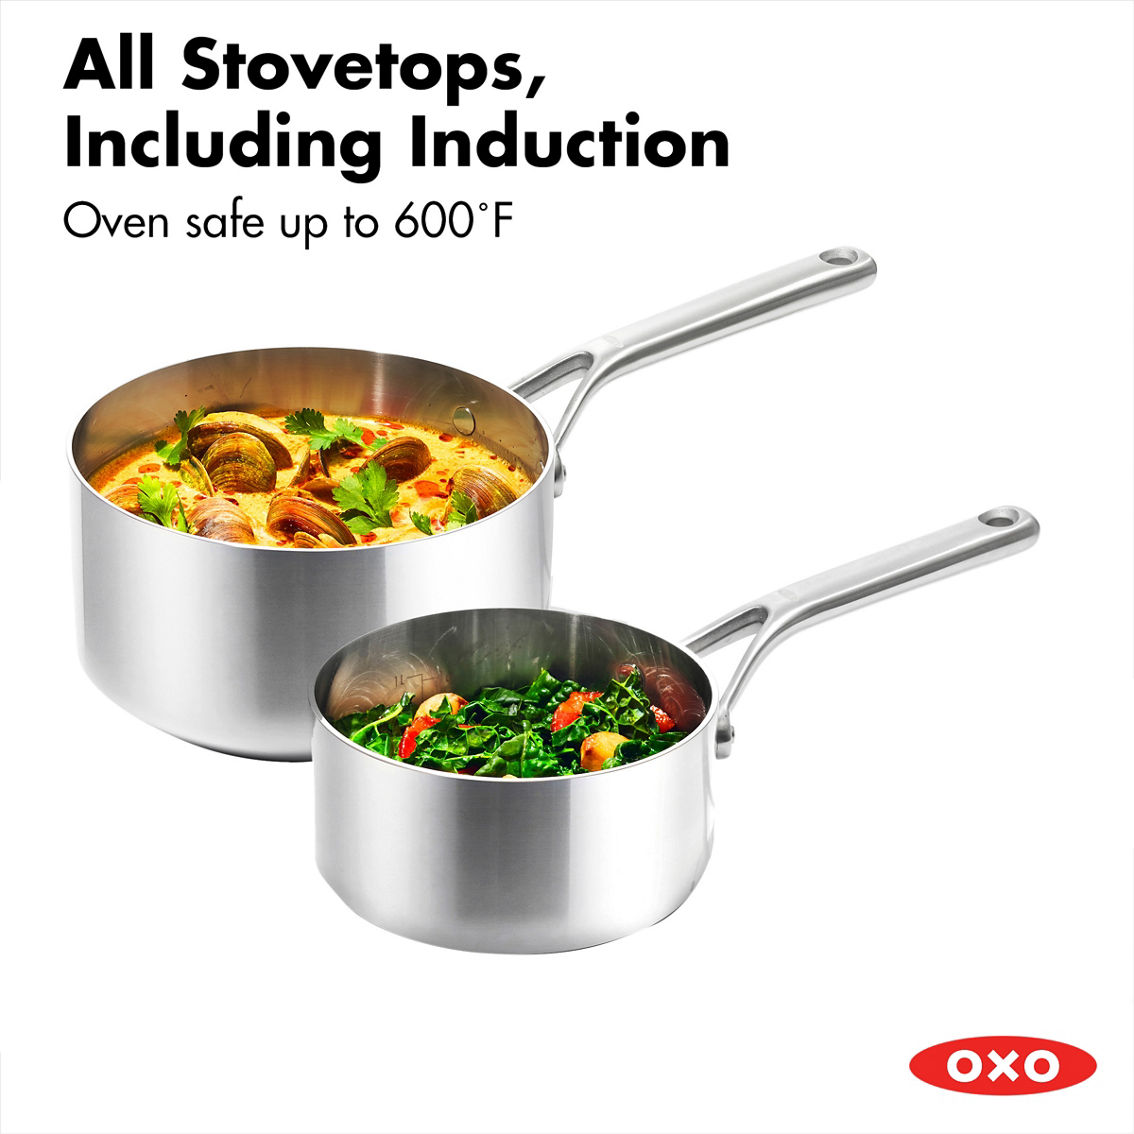 OXO Mira 3-Ply Stainless Steel Cookware Pots and Pans 10 pc. Set - Image 7 of 8